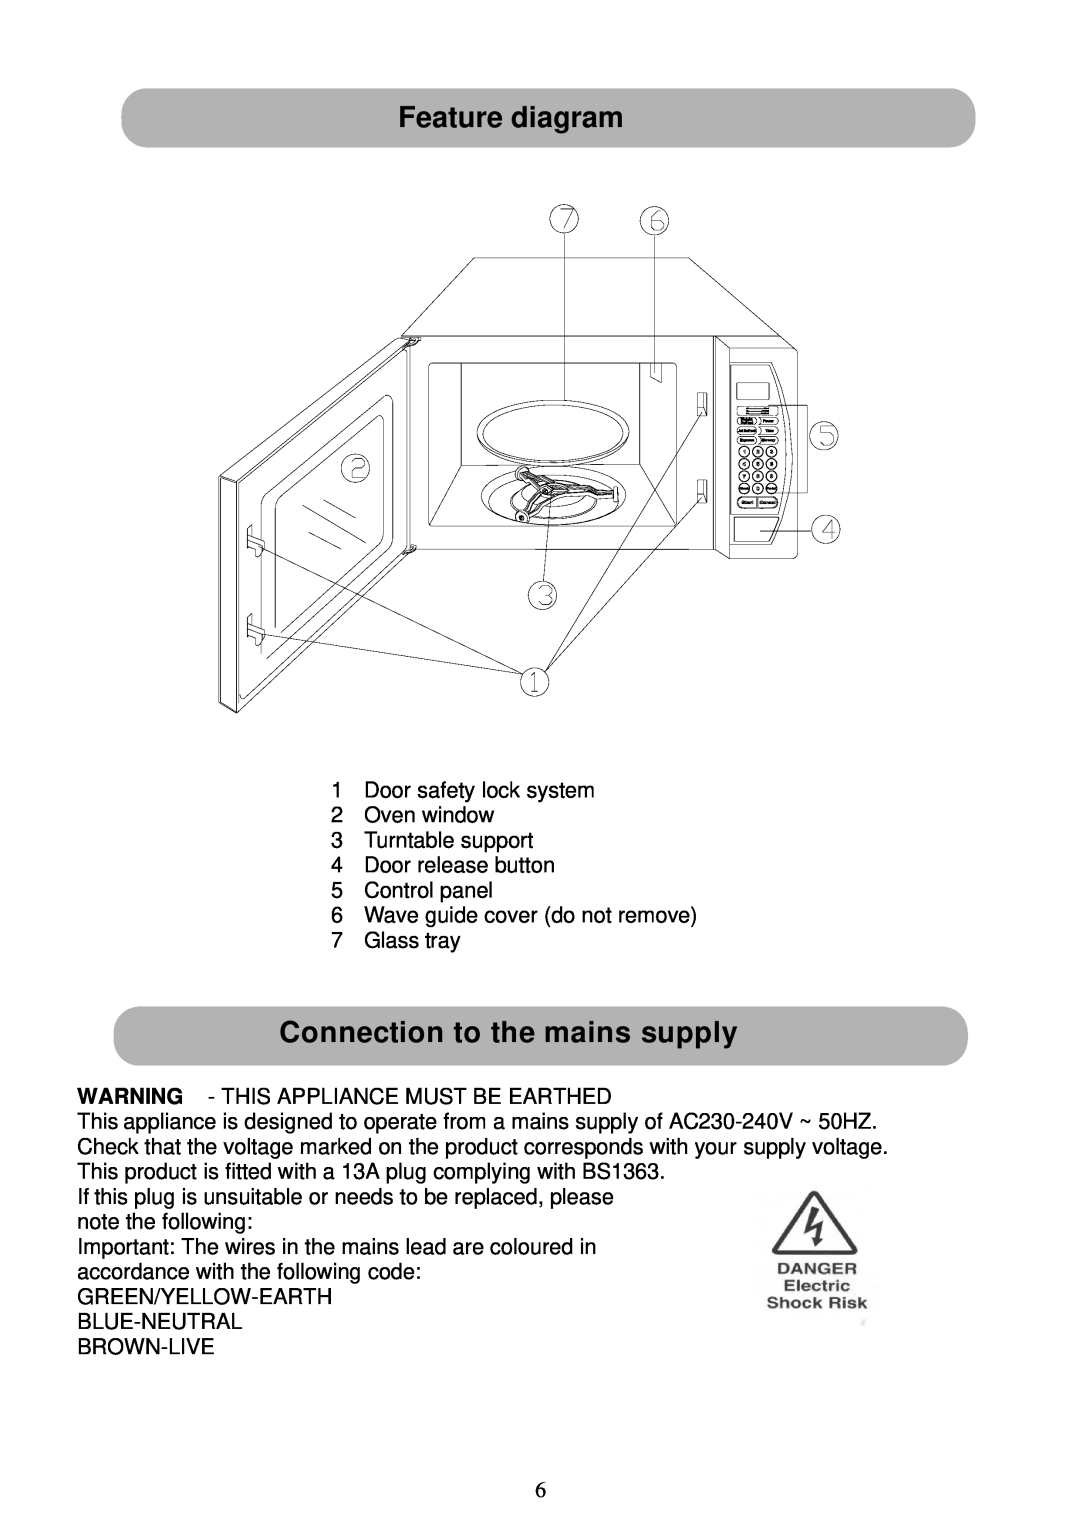 Russell Hobbs RHM2016 user manual Feature diagram, Connection to the mains supply 